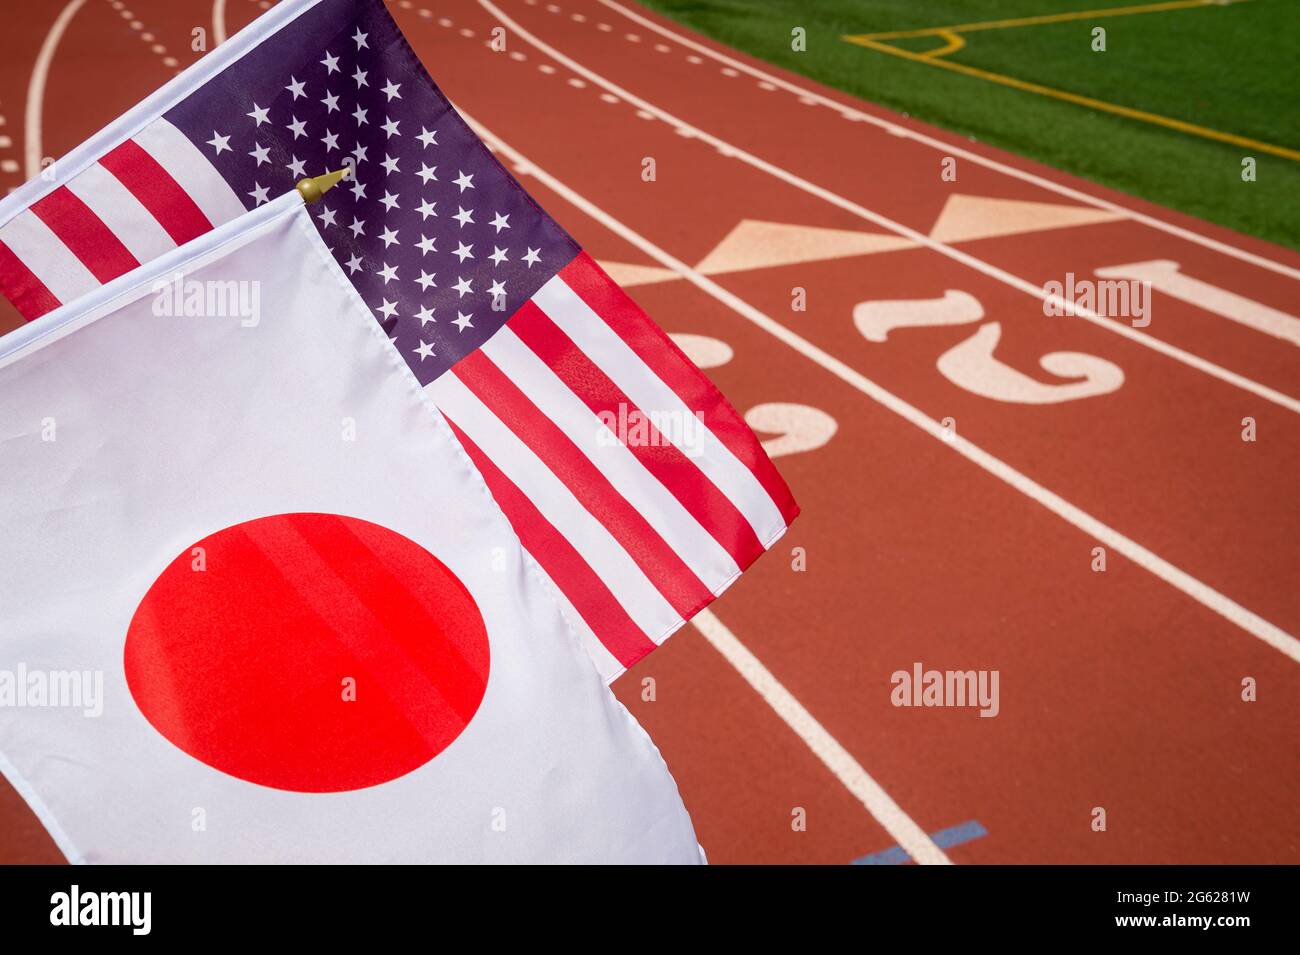 Bright sunny view of USA and Japanese flags flying together in front of the numbered lanes at the starting line of a red running track Stock Photo